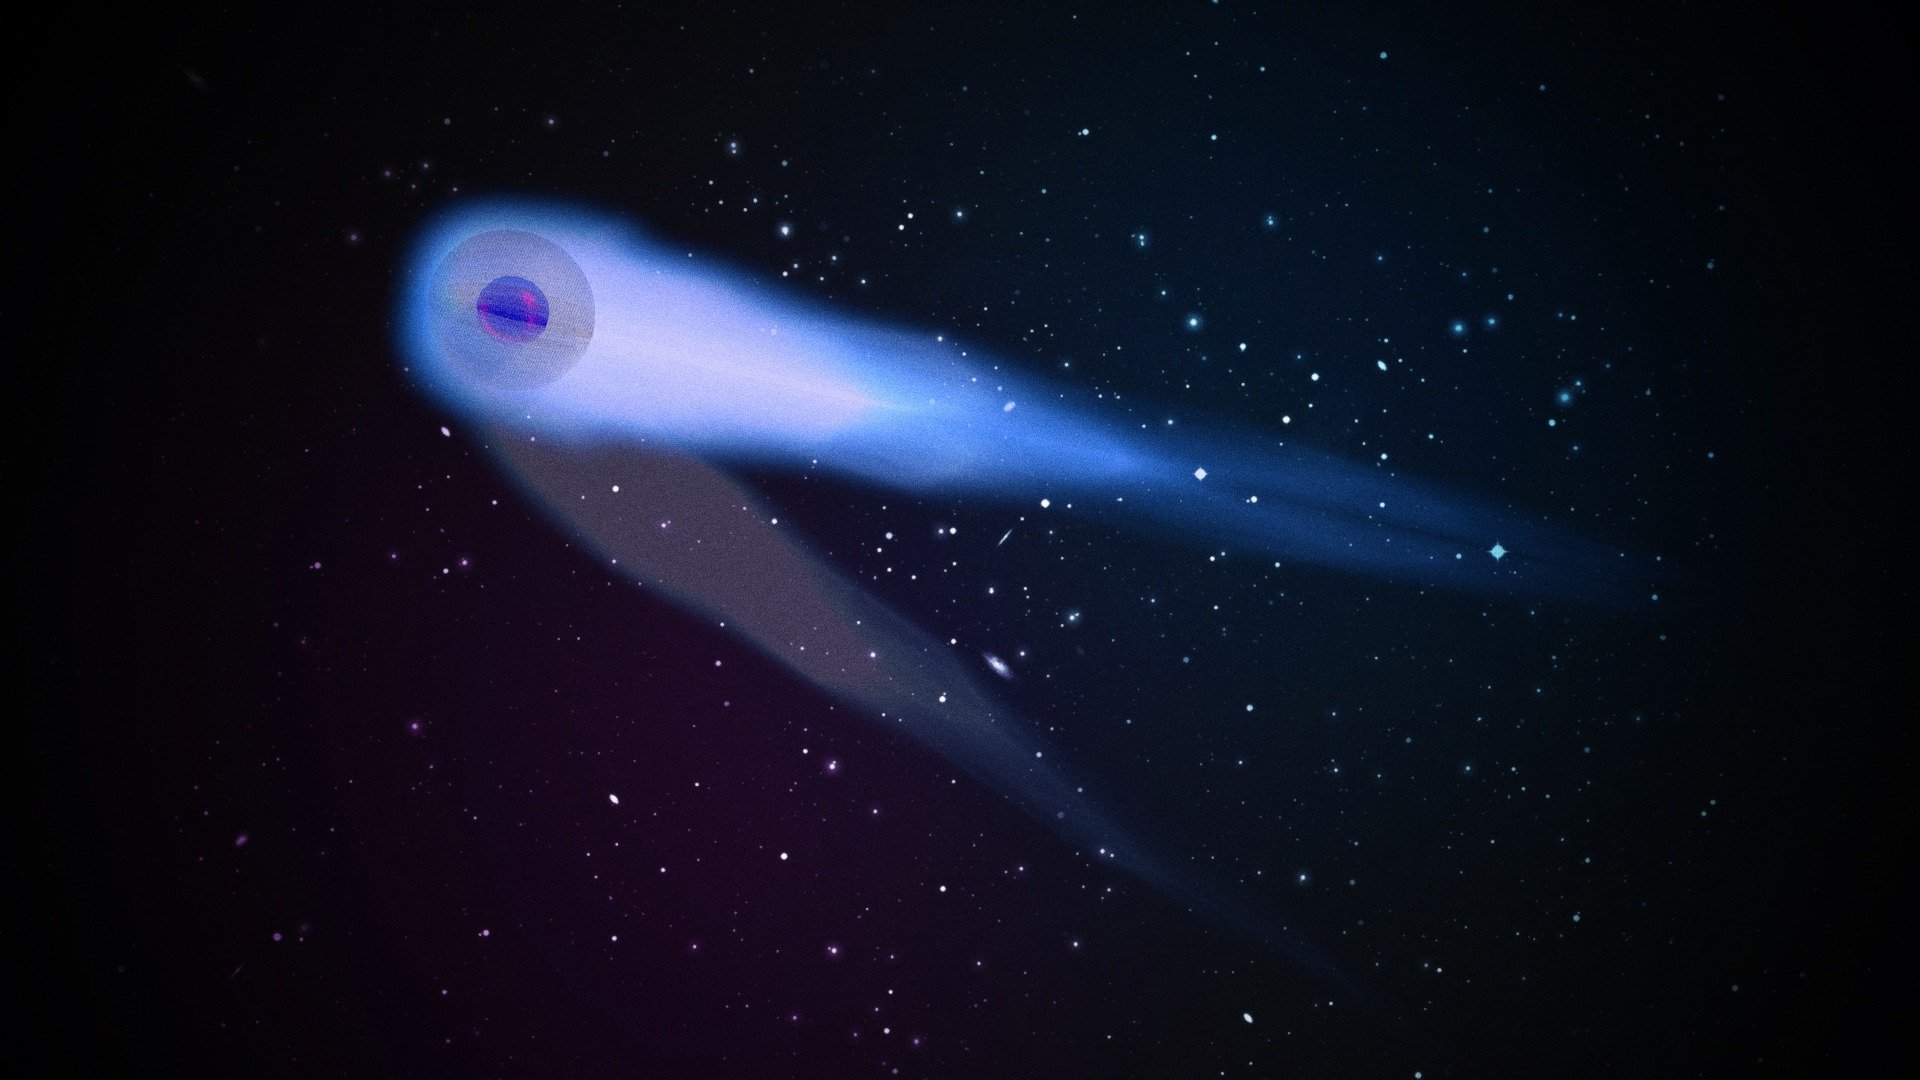 Comets are small, fragile, and irregular bodies found in the solar system orbiting the Sun in highly eccentric orbits. They are a mixture of water, dust particles, and frozen gases that are non-volatile. Comets are also called dirty snowballs or ‘icy mudballs’. The word ‘comet’ comes from the Greek word ‘kometes’, meaning ‘long-haired’.
A comet has five different parts: the nucleus, coma, hydrogen envelope, plasma tail, and a dust tail 3d model